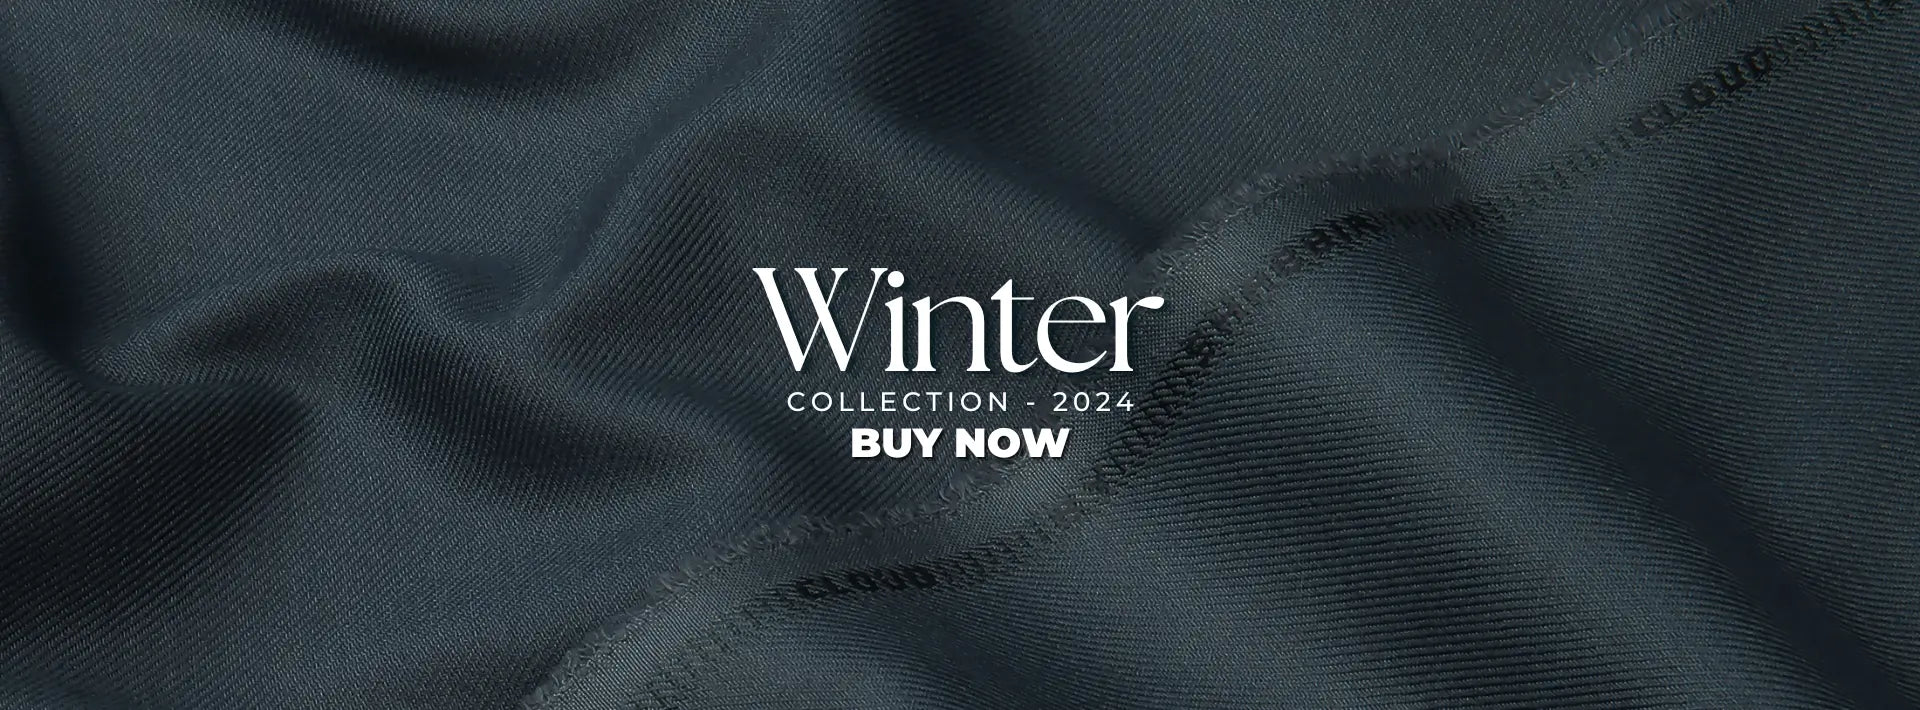 Winter Collection 2024 by Shabbir Fabrics Best Mens Clothing Brand in Pakistan